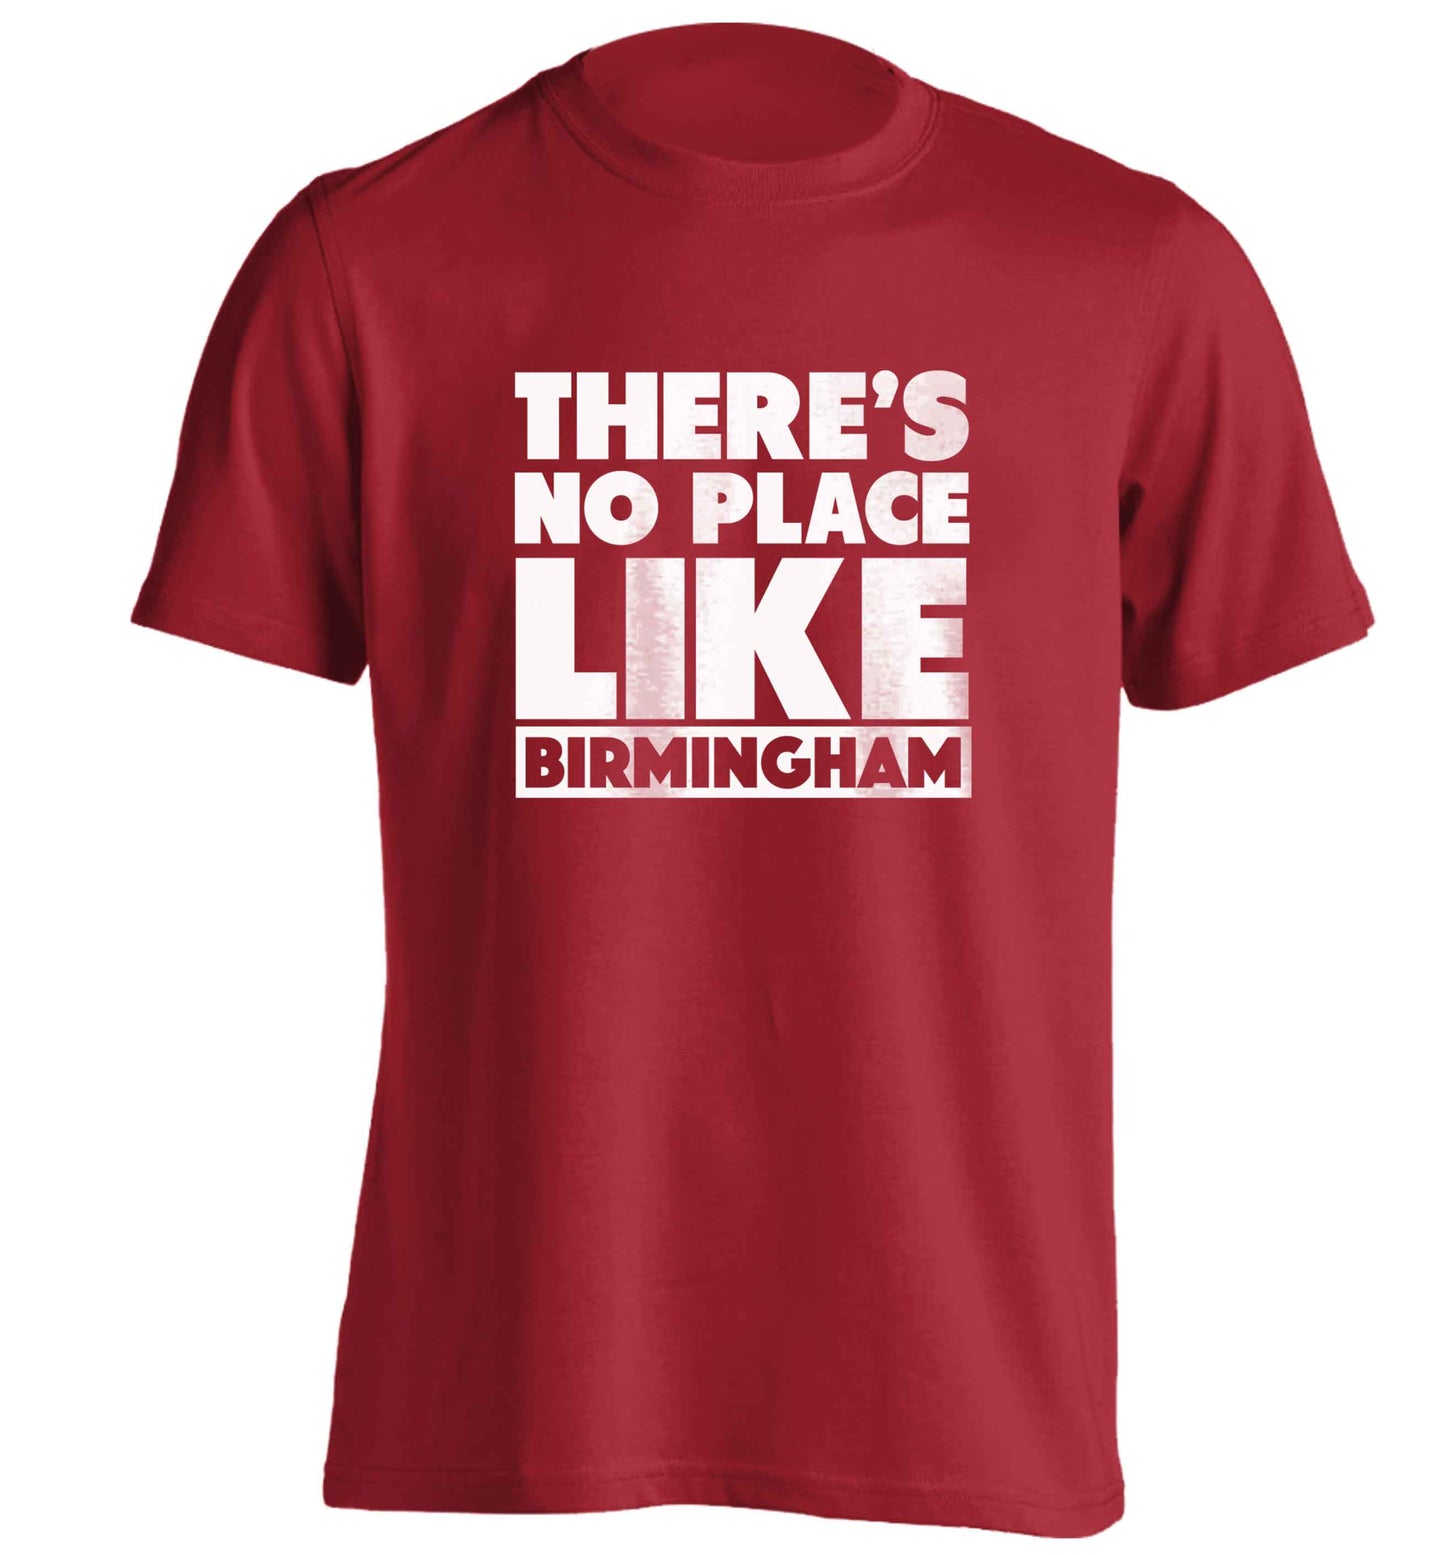 There's no place like Birmingham adults unisex red Tshirt 2XL